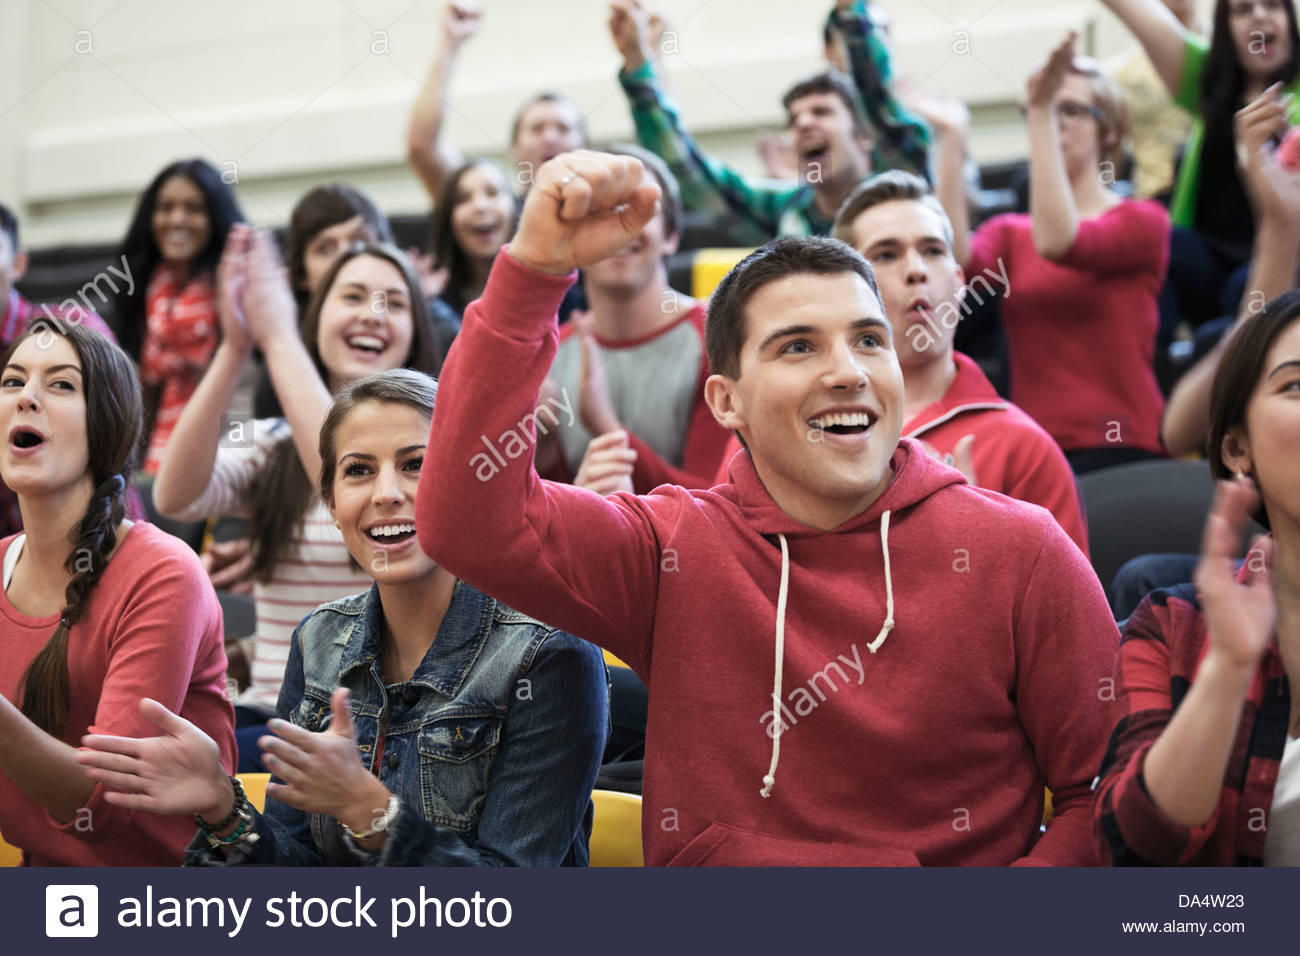 Large group of students cheering at college sporting event Stock Photo